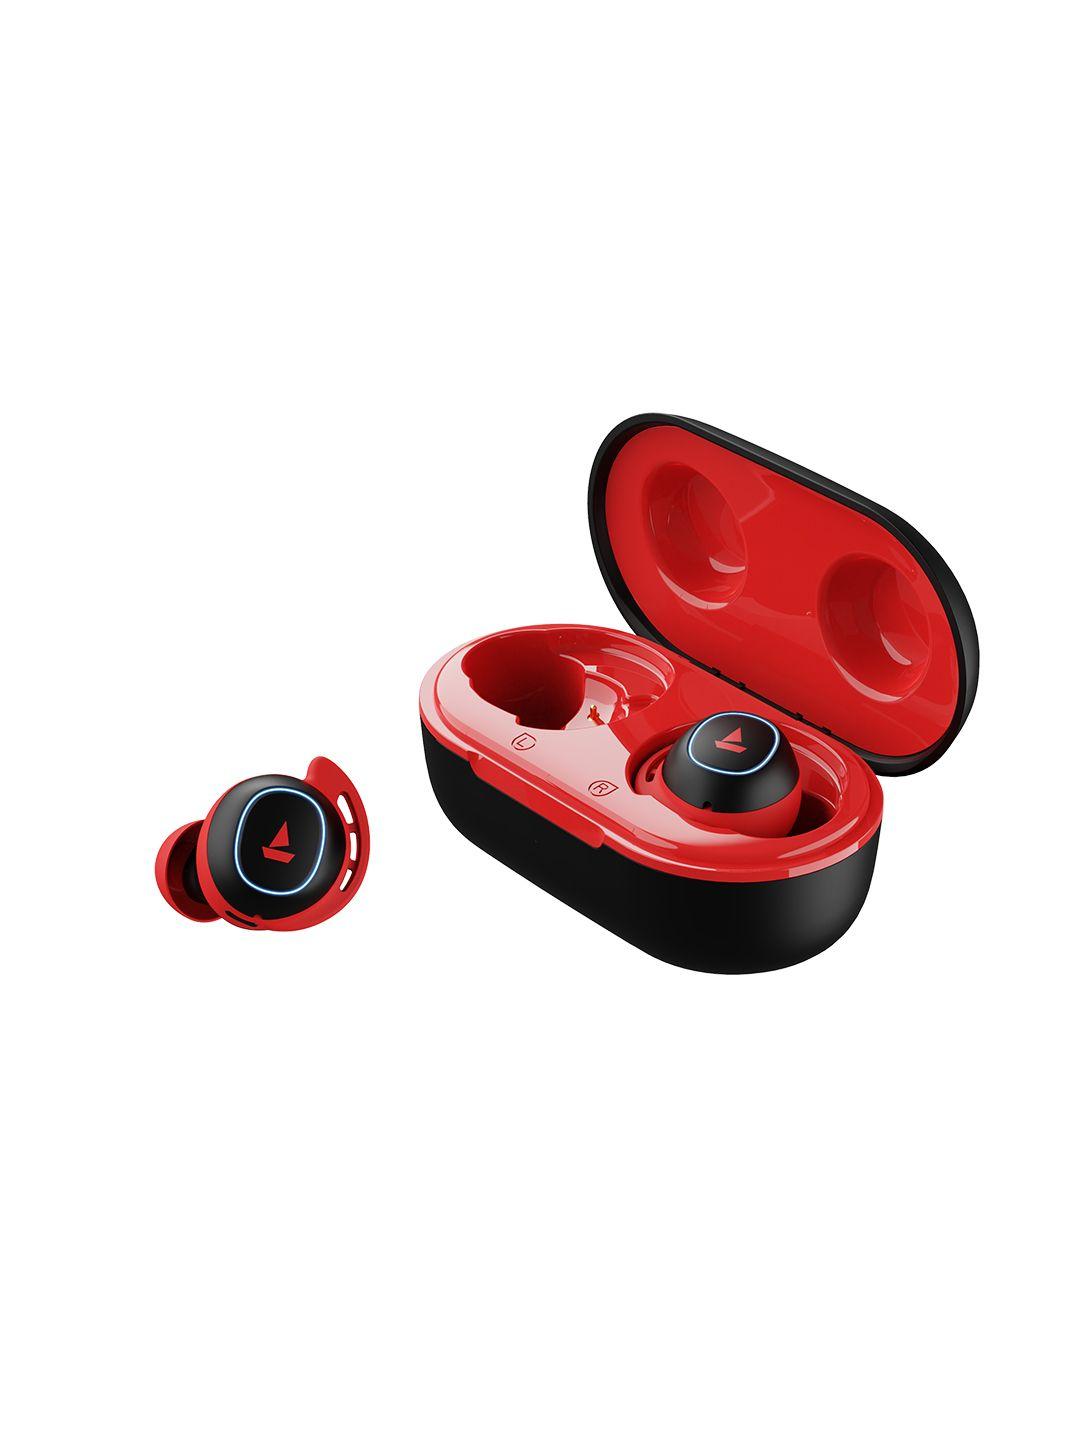 boat airdopes 441 m tws earbuds with iwp technology - raging red